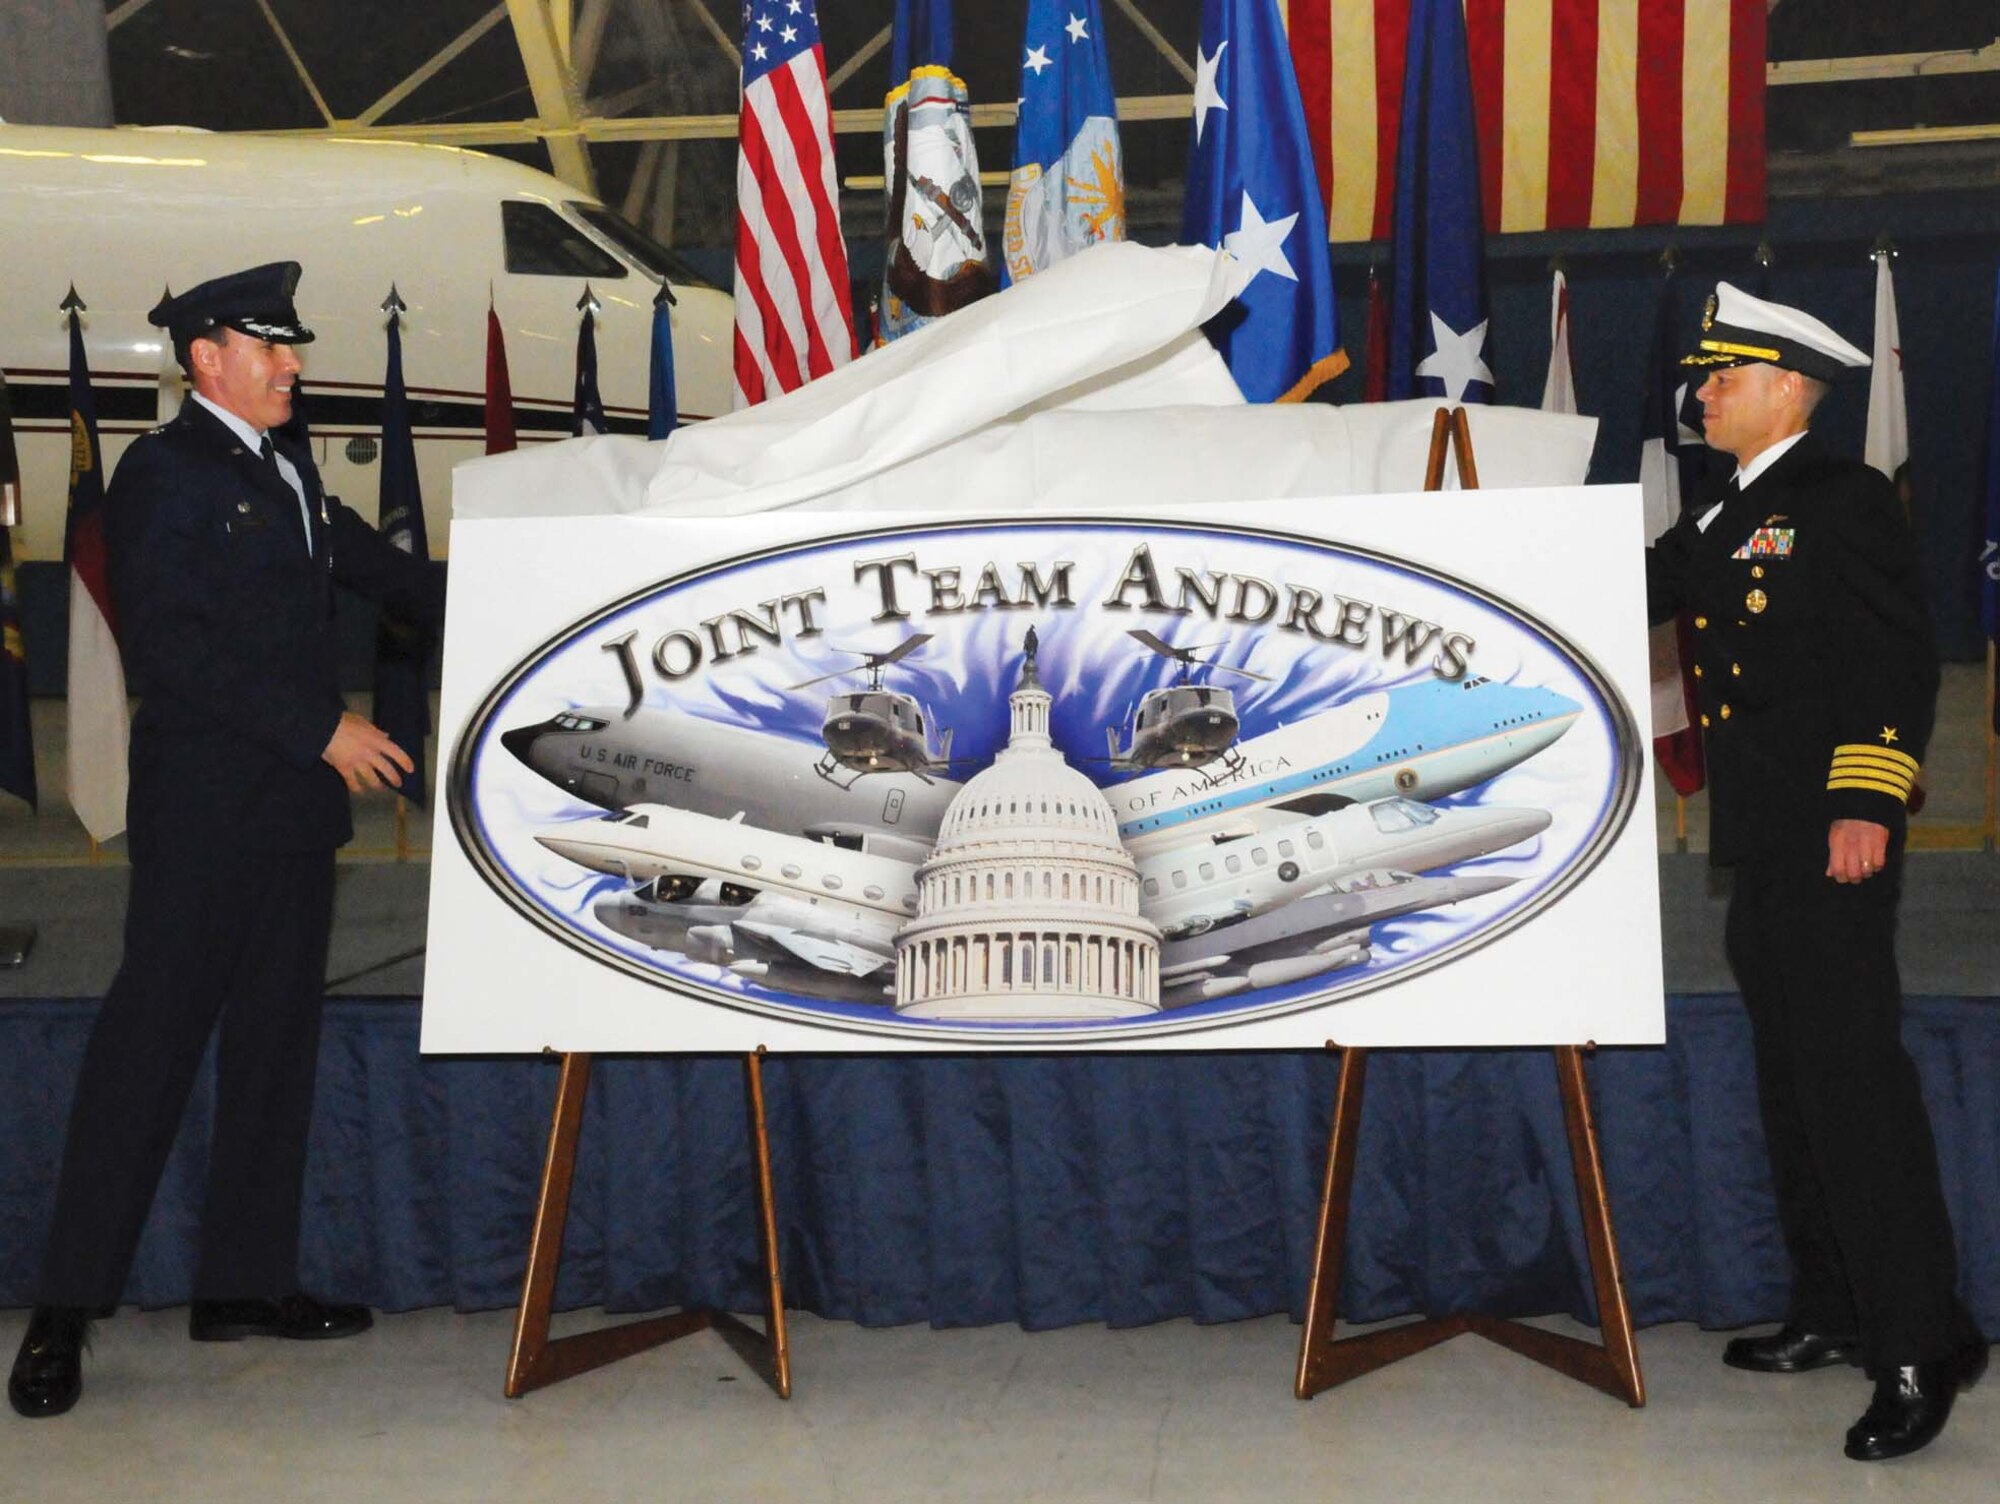 Colonel Steven M. Shepro, 316th Wing/Joint Base Andrews commander, left, and Navy Capt. Timothy Fox, Naval Air Facility Washington commanding officer, right, unveil the Joint Team Andrews logo during a Joint Base ceremony held at Hangar 3 Thursday. The event signified the unification of Andrews Air Force Base and Naval Air Facility Washington, and renamed the installation as Joint Base Andrews Naval Air Facility Washington. Among the official guests in attendance were Maj. Gen. Ralph J. Jodice II, Air Force District of Washington commander, Rear. Adm. Julius S. Caesar, Navy Installation Command Reserve deputy commander, and Navy Capt. Catherine Hanft, Naval Support Activity South Potomac commanding officer. The logo, designed by Airman 1st Class Kat Lynn Justen, 316 WG public affairs specialist, signifies the diverse missions of Joint Team Andrews and the role of the installation in the National Capital Region. (U.S. Air Force photo/ Bobby Jones)